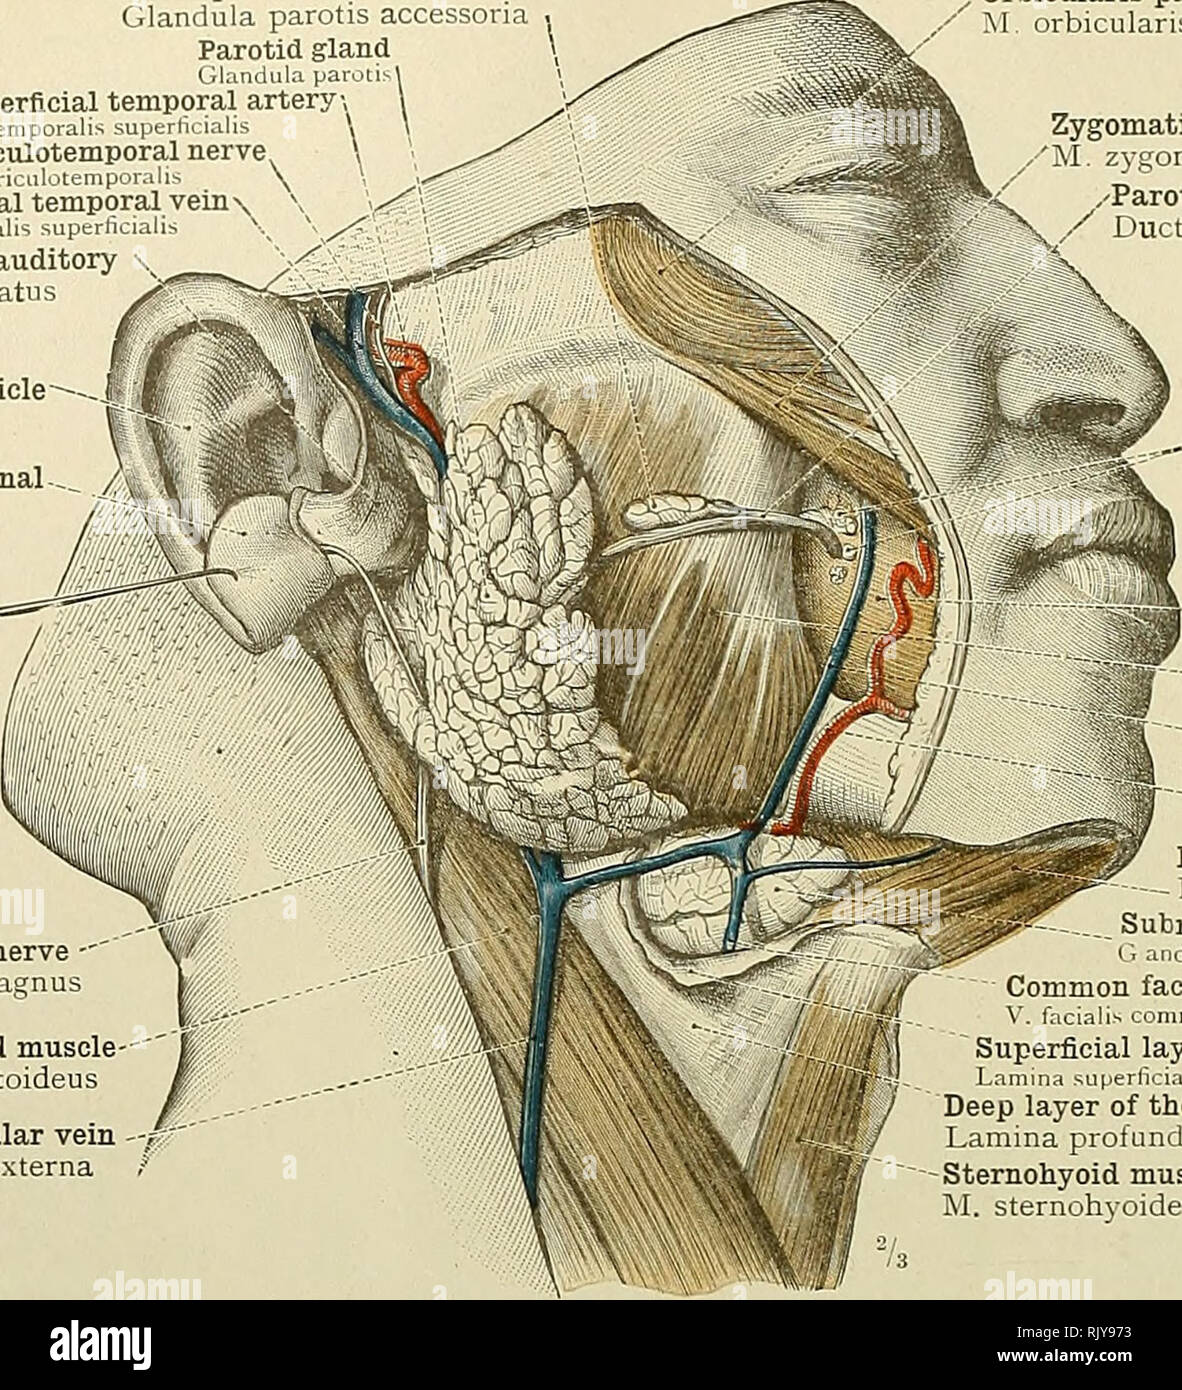 . An atlas of human anatomy for students and physicians. Anatomy. 424 CEPHALIC AND CERVICAL PORTIONS OF THE DIGESTIVE ORGANS Socia parotidis Glandula parotis accessoua Parotid gland Glandula parolisl Superficial temporal artery,  A. temporalis superlicialis   Auriculotemporal nerve N. aunmlotempor lU-.  Superficial temporal vem  - V. temporalis superhcialis ^ Cartilage of the external auditory  meatusâCartilage meatus auditcrii externi Pinna, or auricle- Auricula Lobe or lobule of the external. ear (turned upwards) Lobulus auriculas. Great auricular nerve -' N. auricularis magnus Sternoc Stock Photo